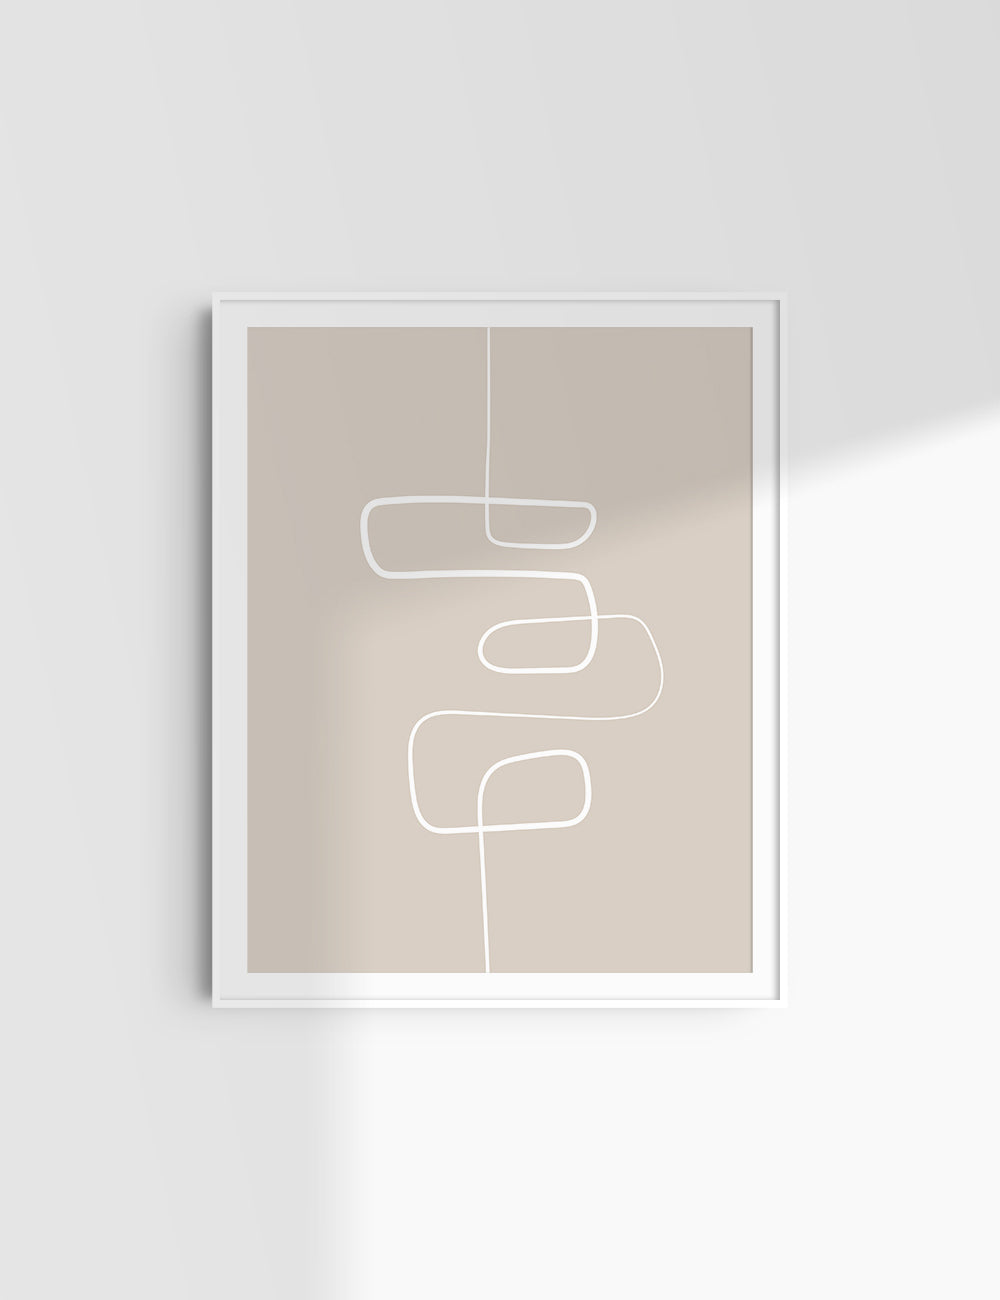 MINIMALIST, ABSTRACT ONE LINE ART. Beige and White. Printable Wall Art Illustration.